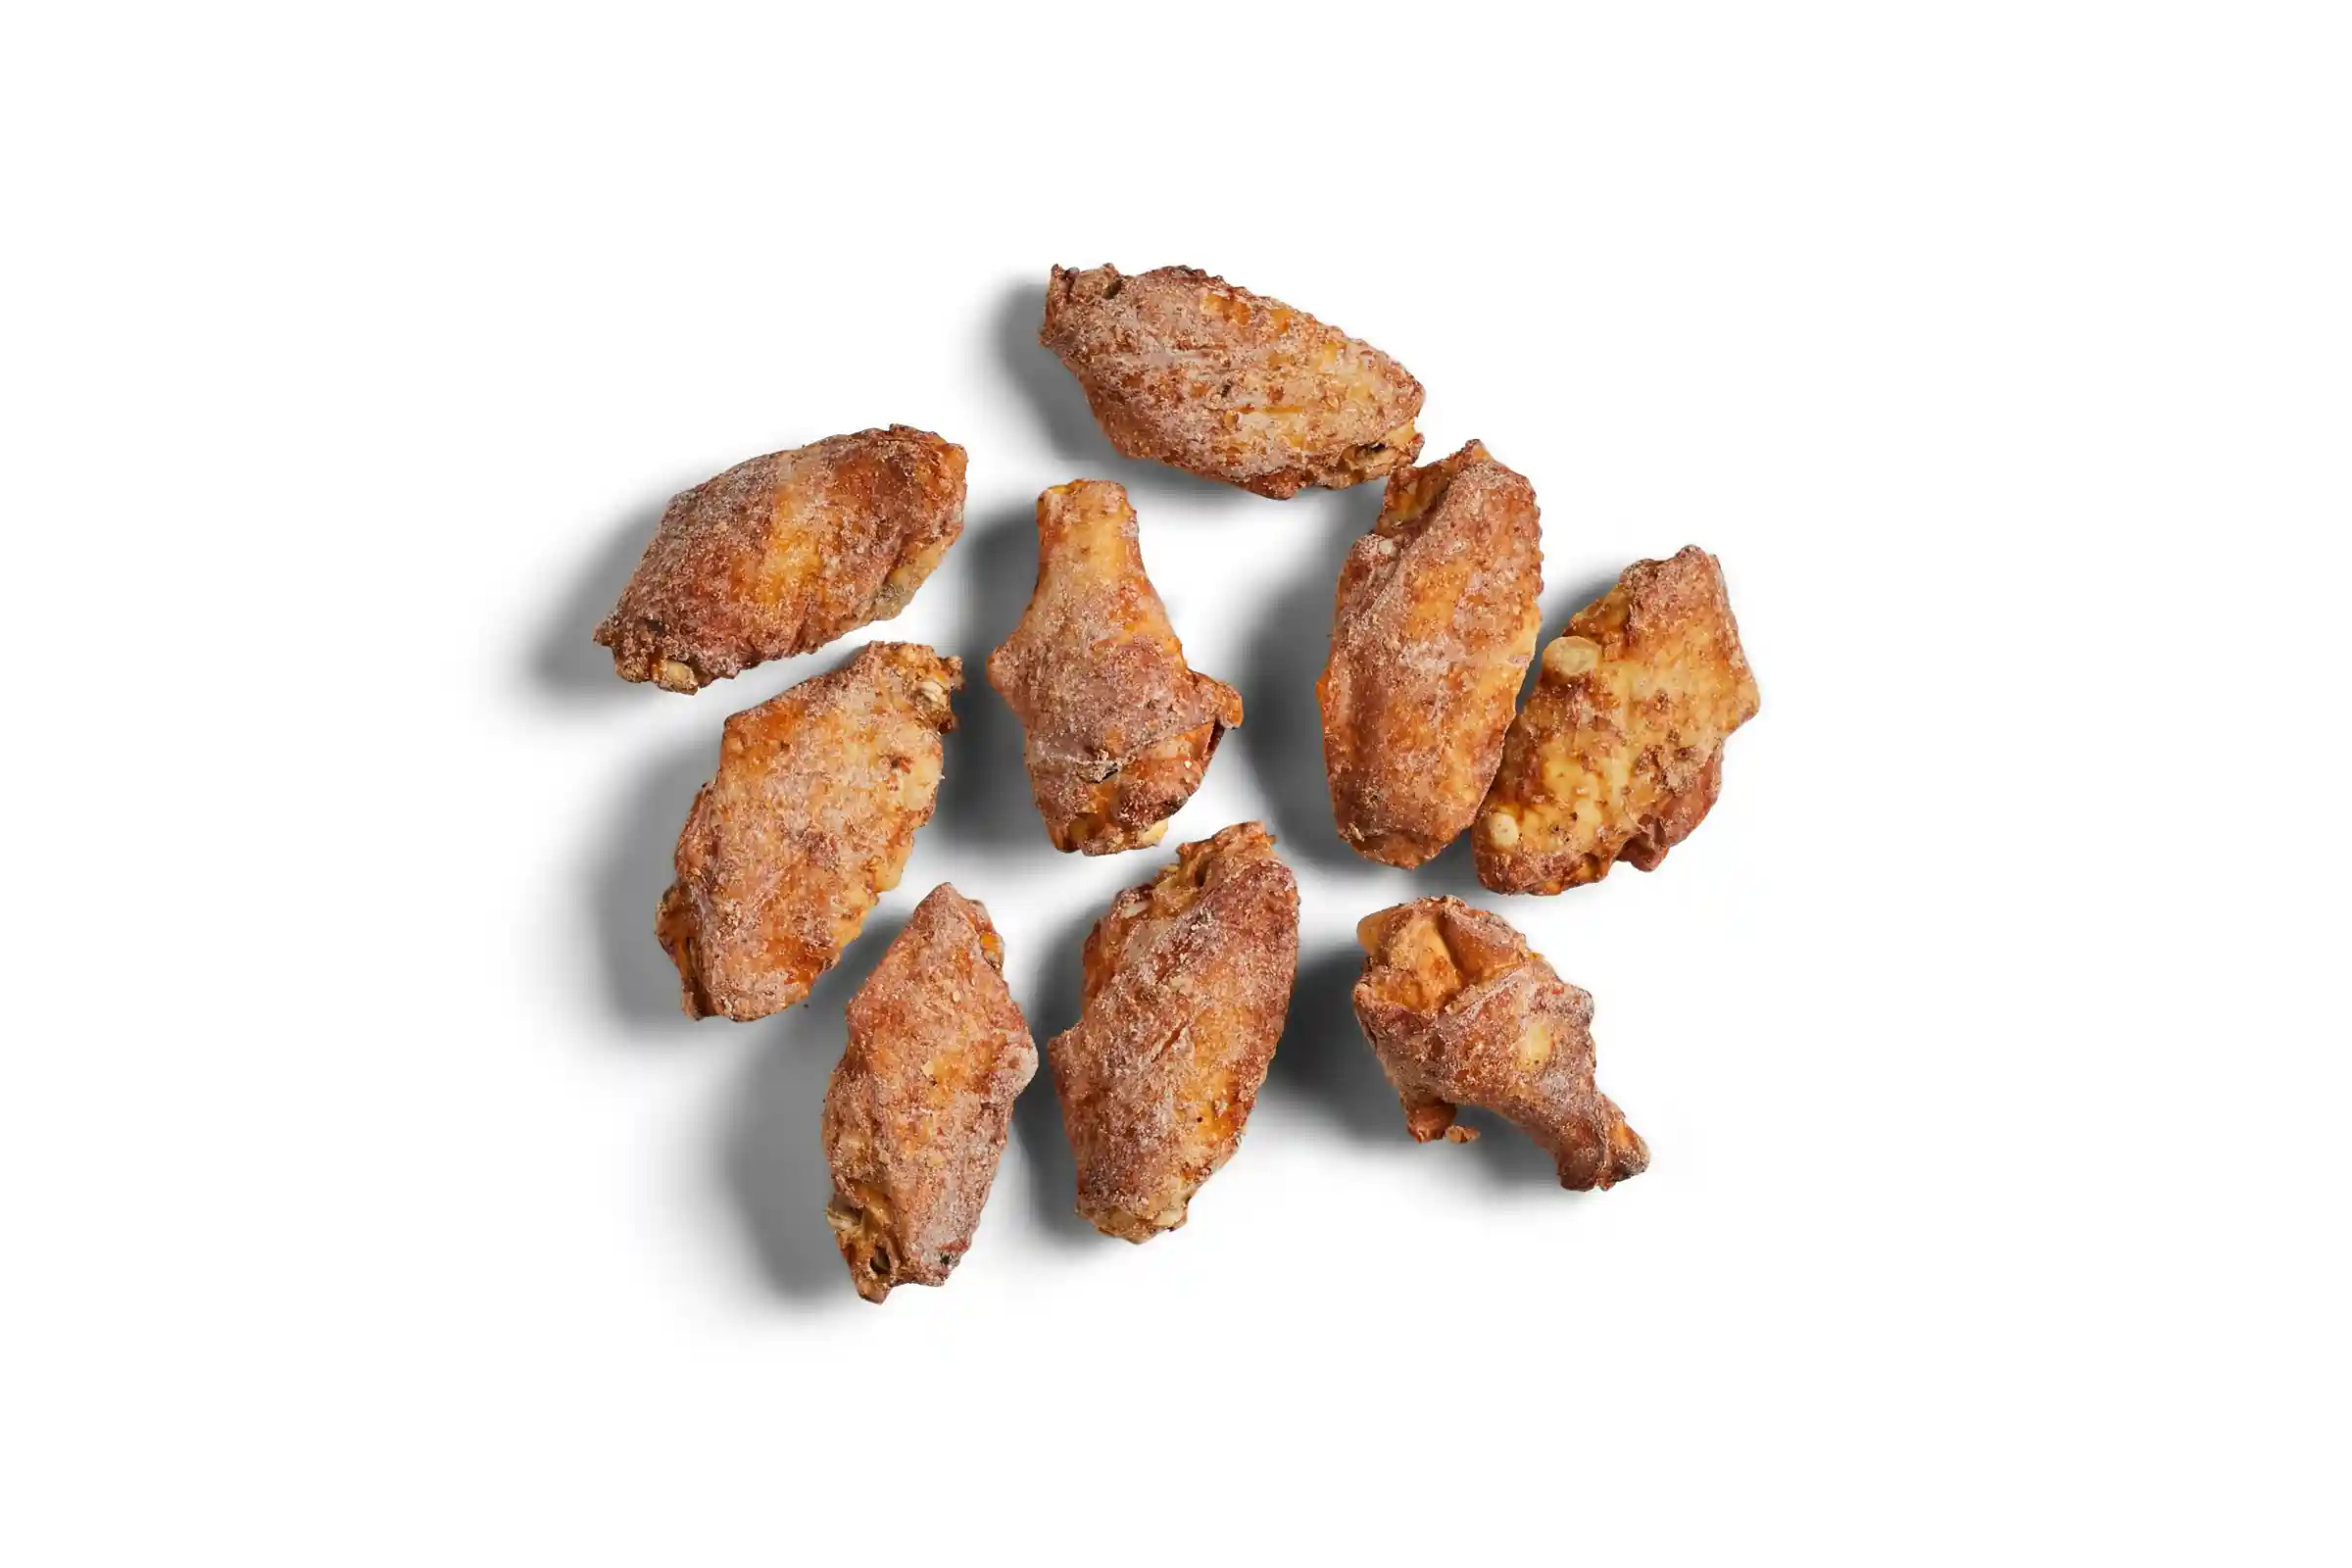 Tyson Red Label® Fully Cooked Unbreaded Applewood Smoked Bone-In Chicken Wing Sections, Jumbo https://images.salsify.com/image/upload/s--7aUbi-7h--/q_25/jjgfsmzqwjrsgpxec7xe.webp